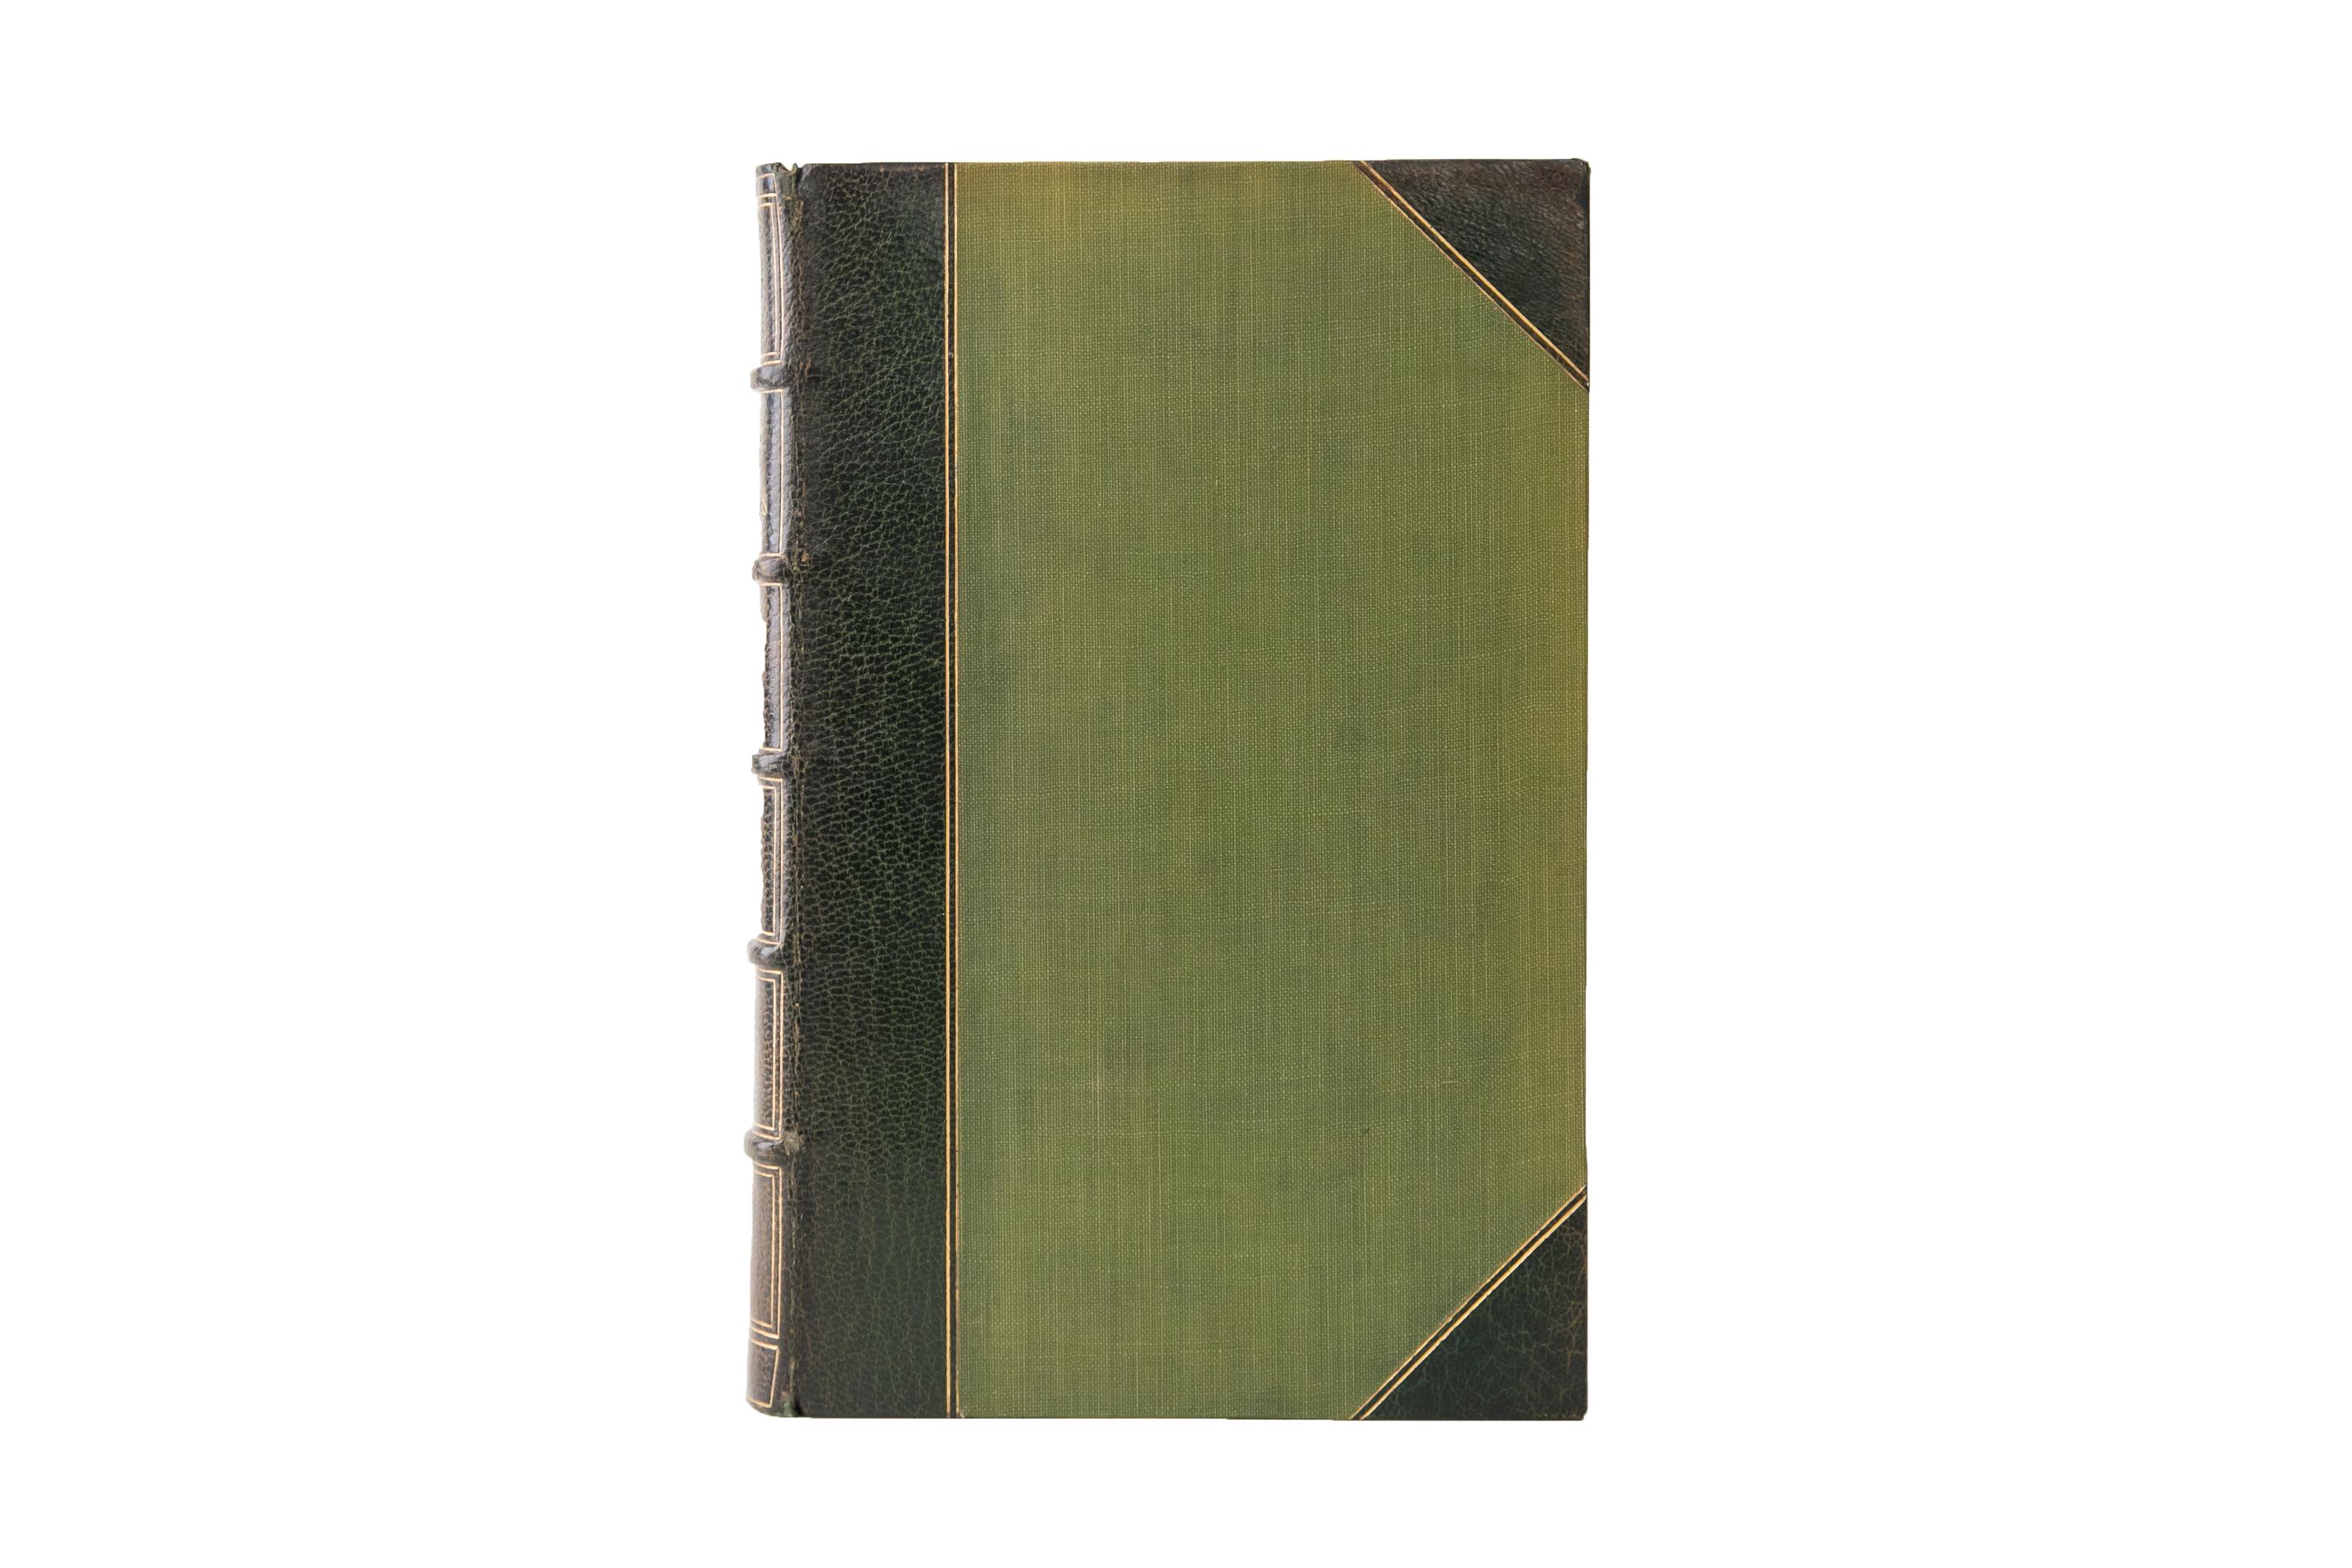 4 Volumes. George Rawlinson, History of Herodotus. Second Edition. Bound in 3/4 green morocco and linen boards double bordered in gilt-tooling. The spines display raised bands, bordering, and label lettering, all gilt-tooled. The top edges are